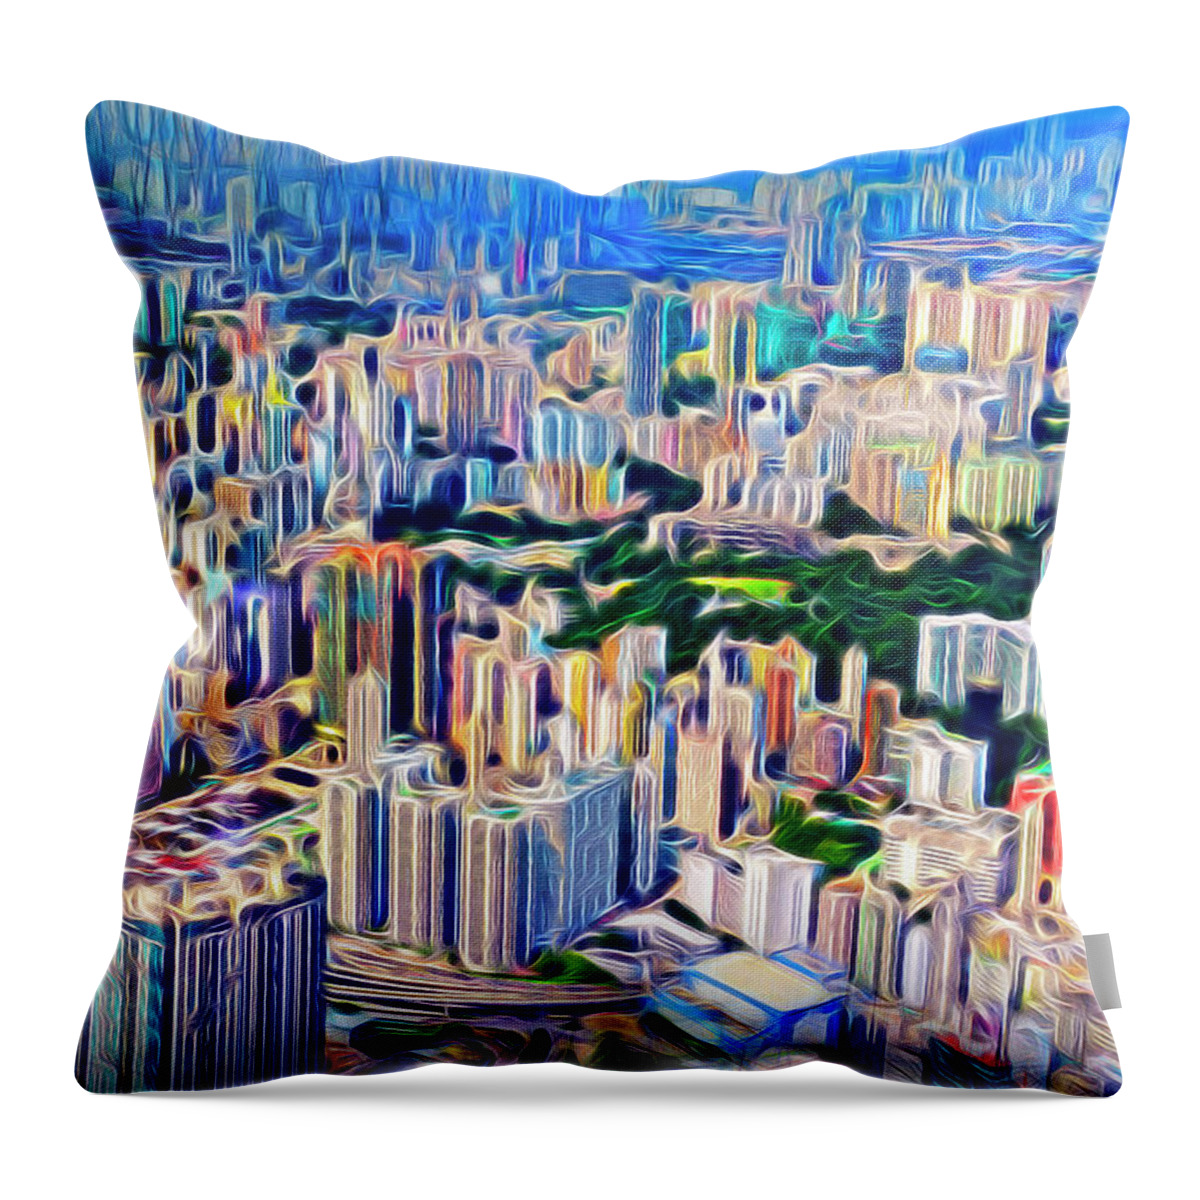 Abstract Throw Pillow featuring the photograph Crowded Hong Kong Abstract by Endre Balogh